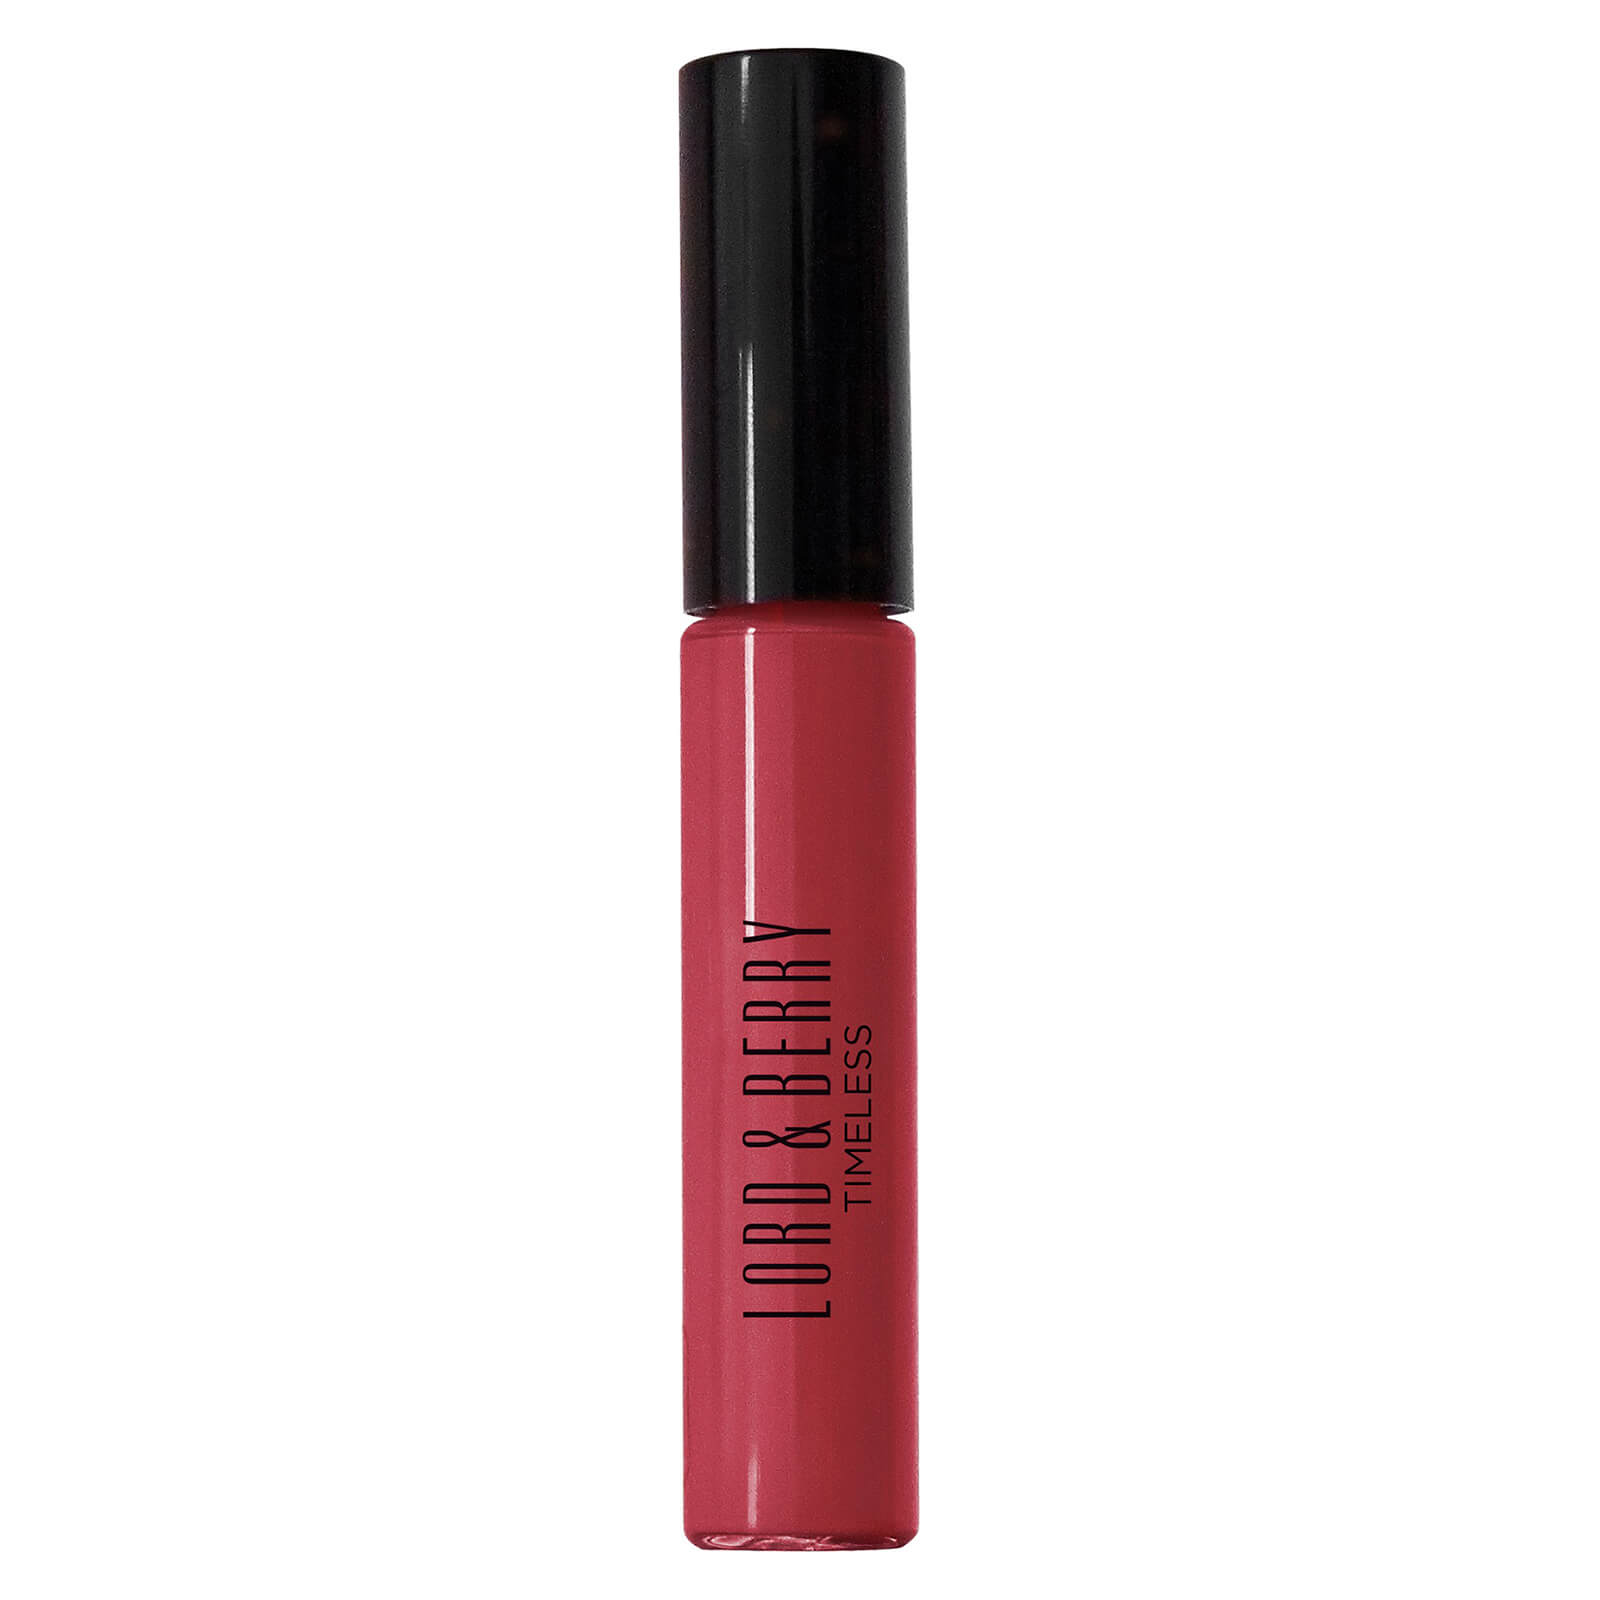 Lord & Berry Timeless Kissproof Lipstick - 4 Bloom